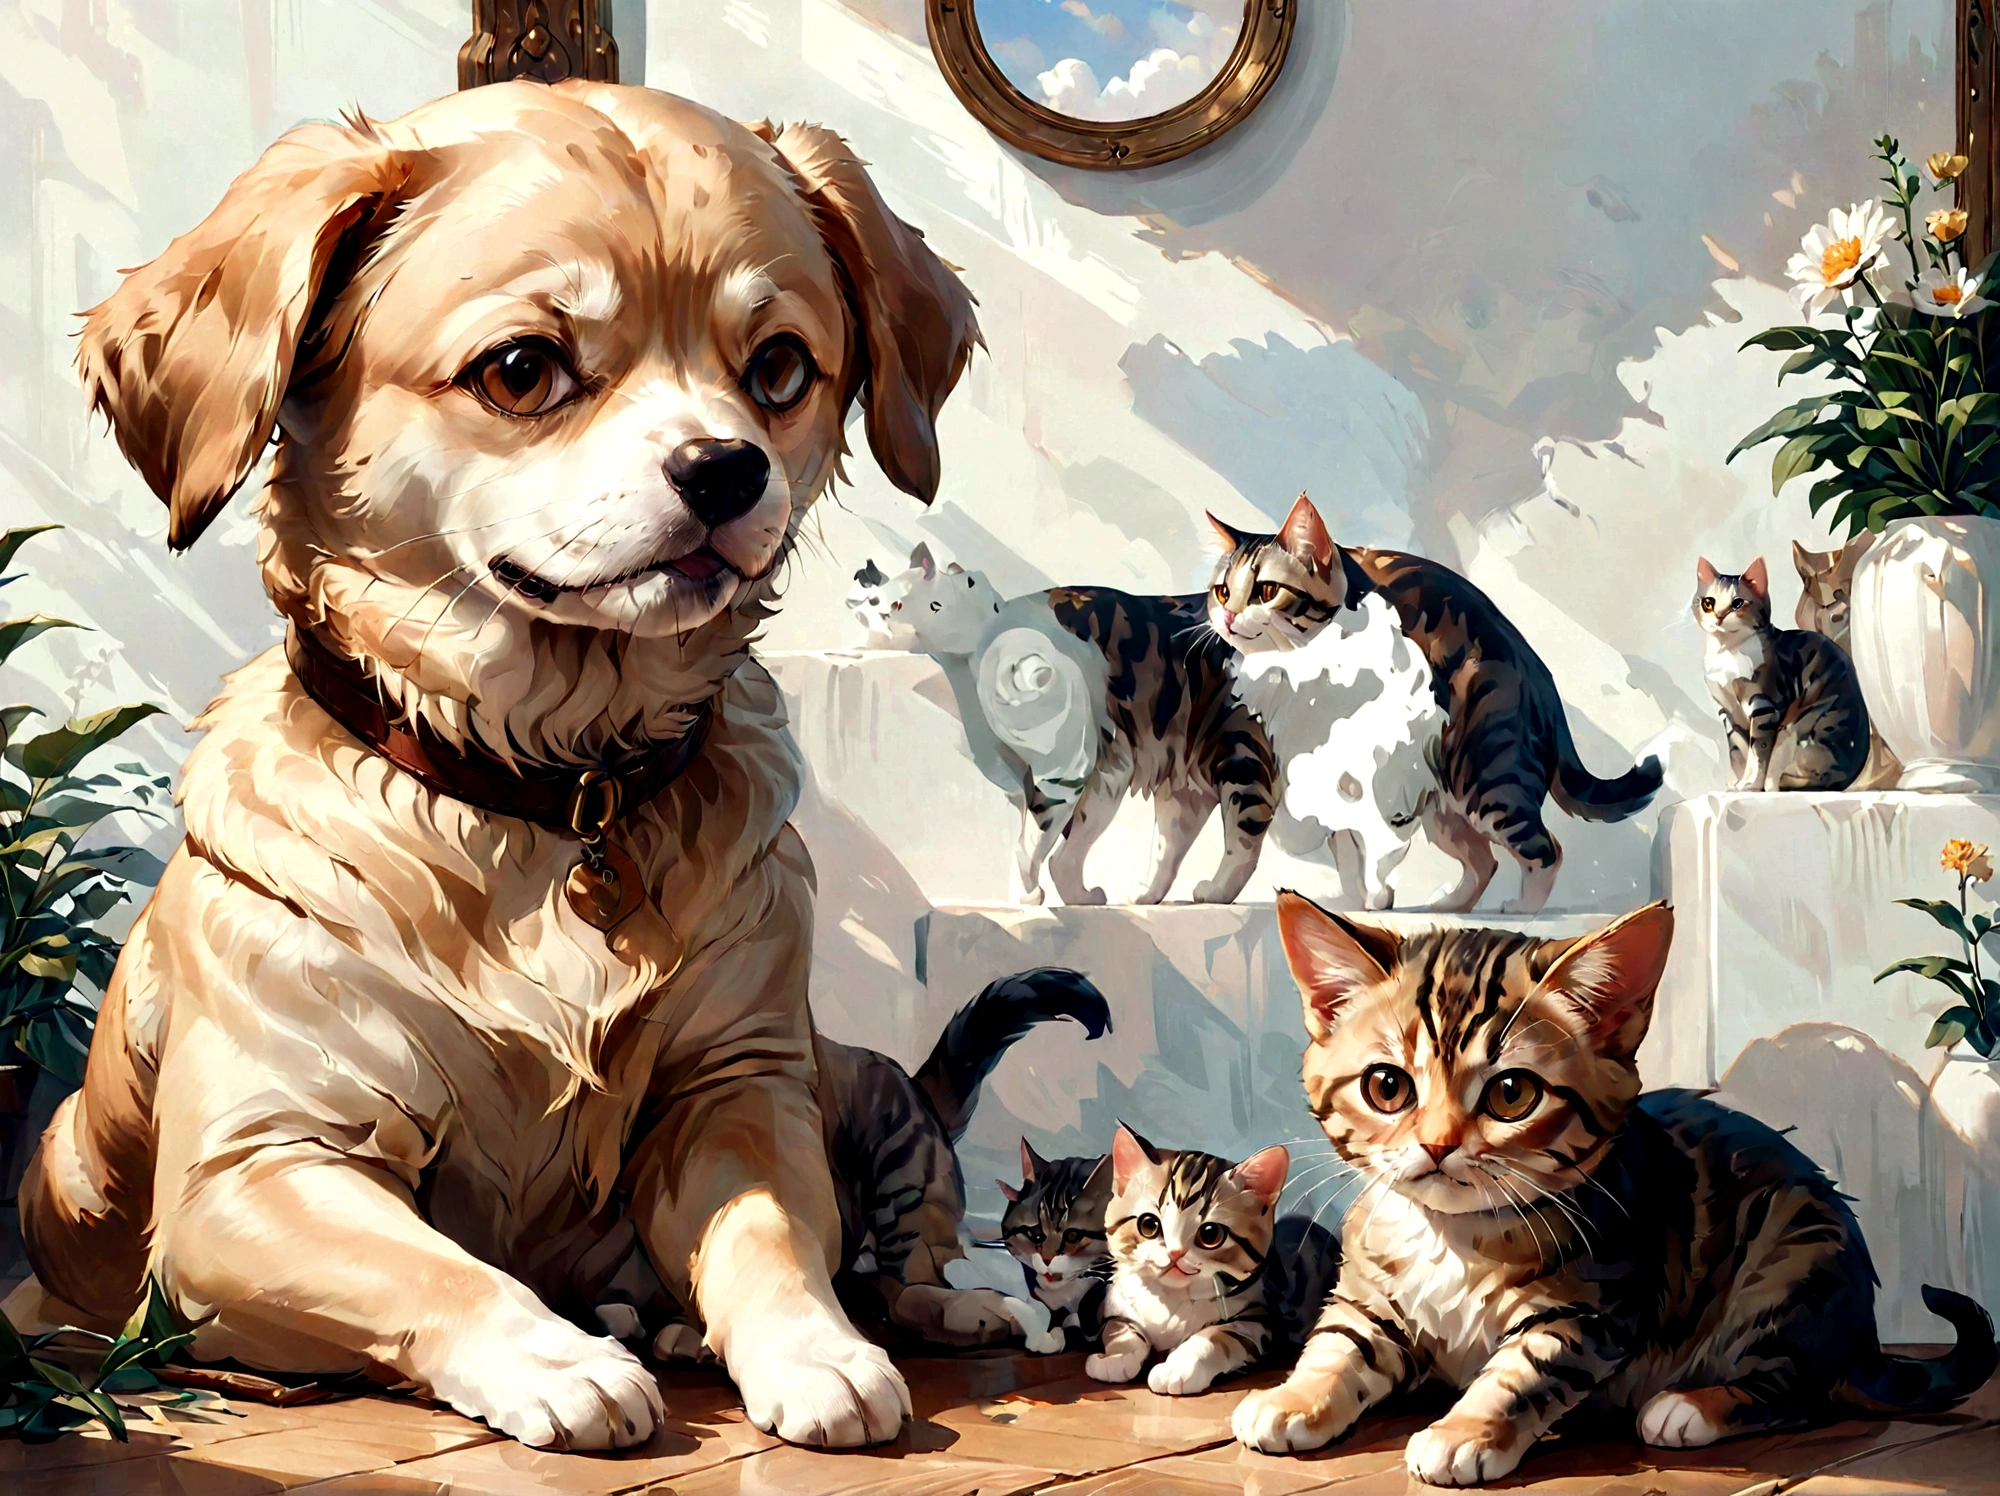 "A realistic painting of a dog and a cat in the exact same positions as in the provided photo. The dog is on the left, facing forward with a slightly tilted head, light brown fur, and a happy expression. The cat is on the right, laying down, with dark tabby fur and large eyes, also facing forward. The background should be a plain wall, just like in the photo. The overall composition and details should closely match the original photo."

